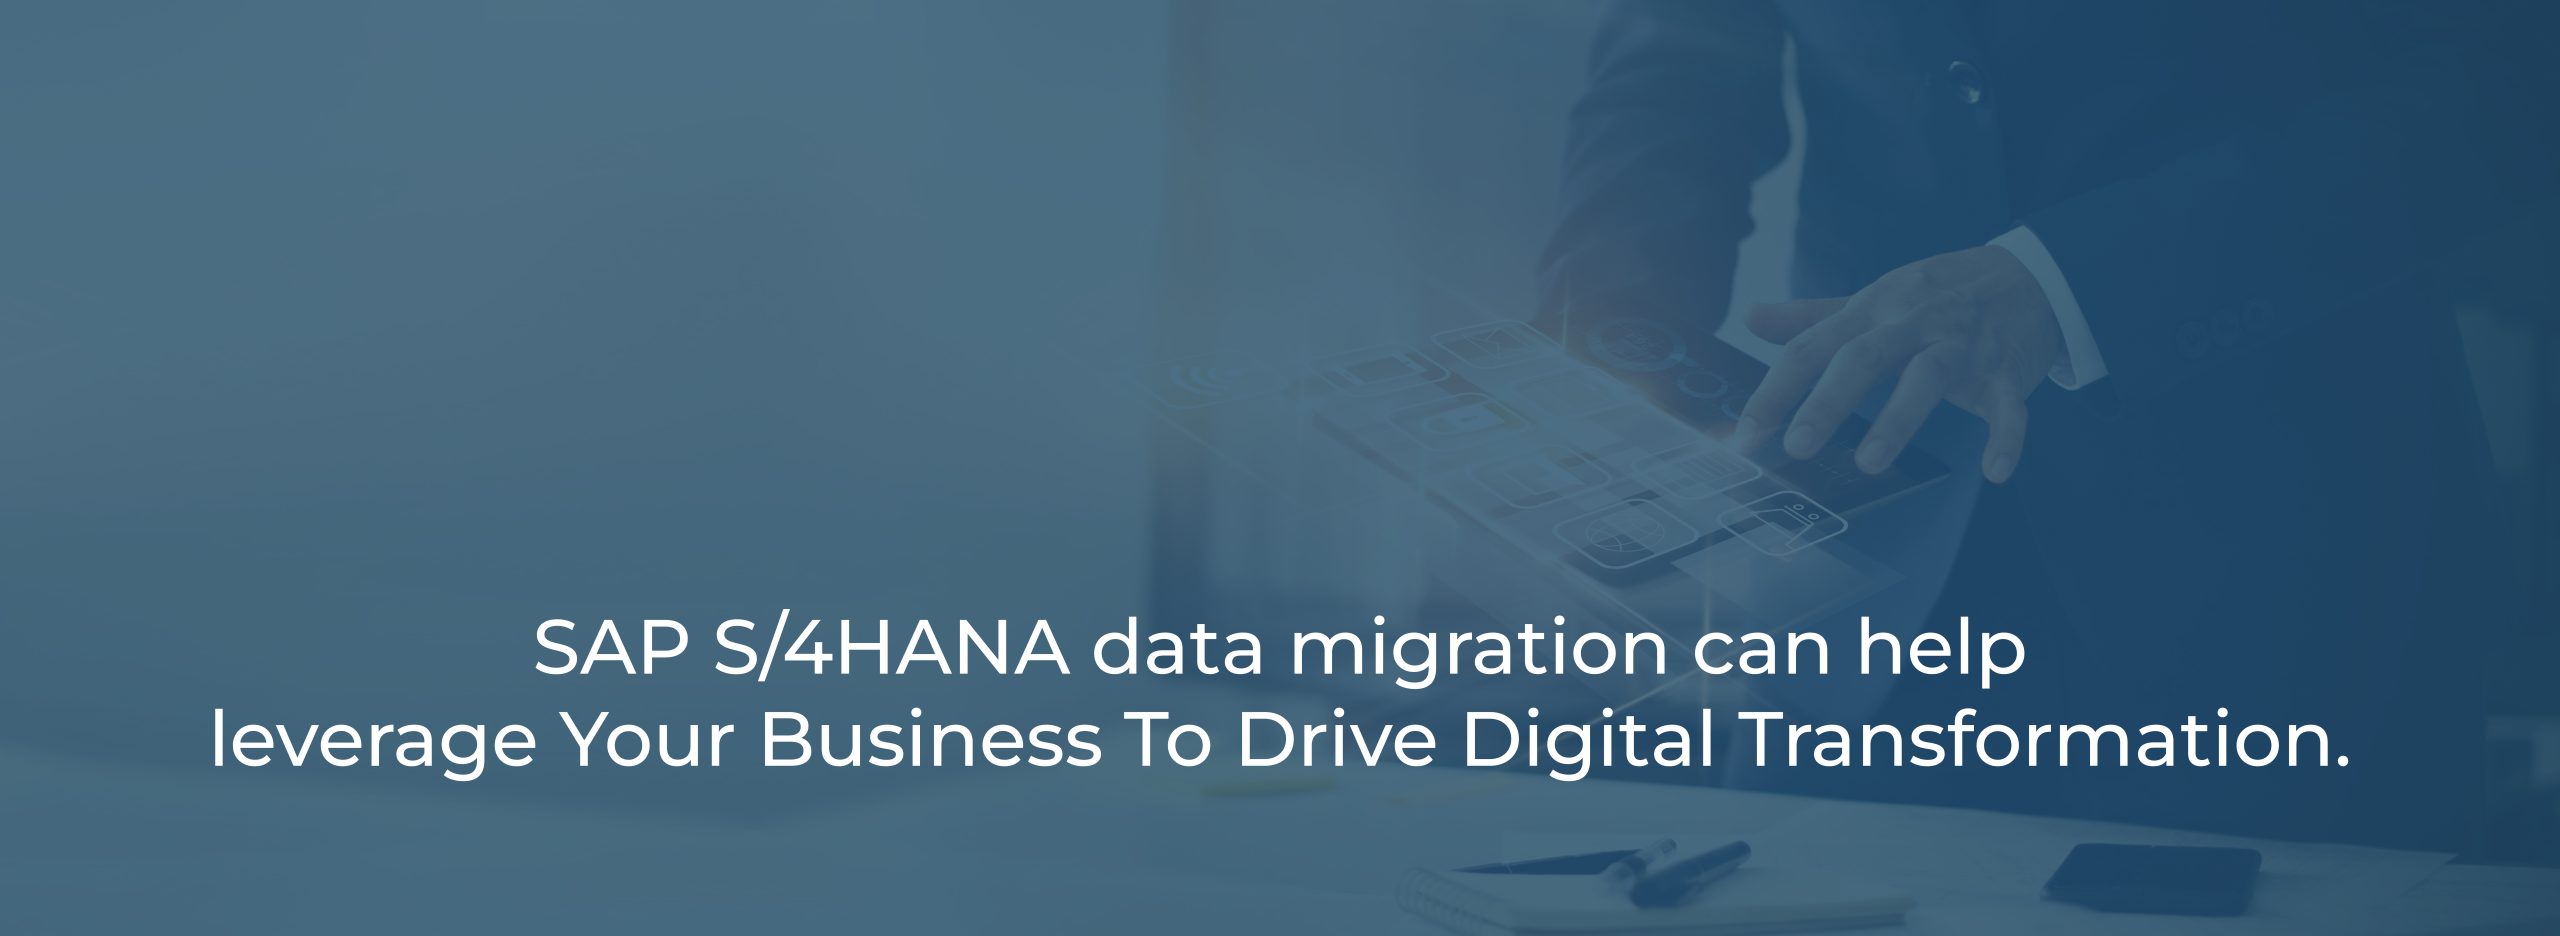 S4HANA data migration can help leverage Your Business To Drive Digital Transformation